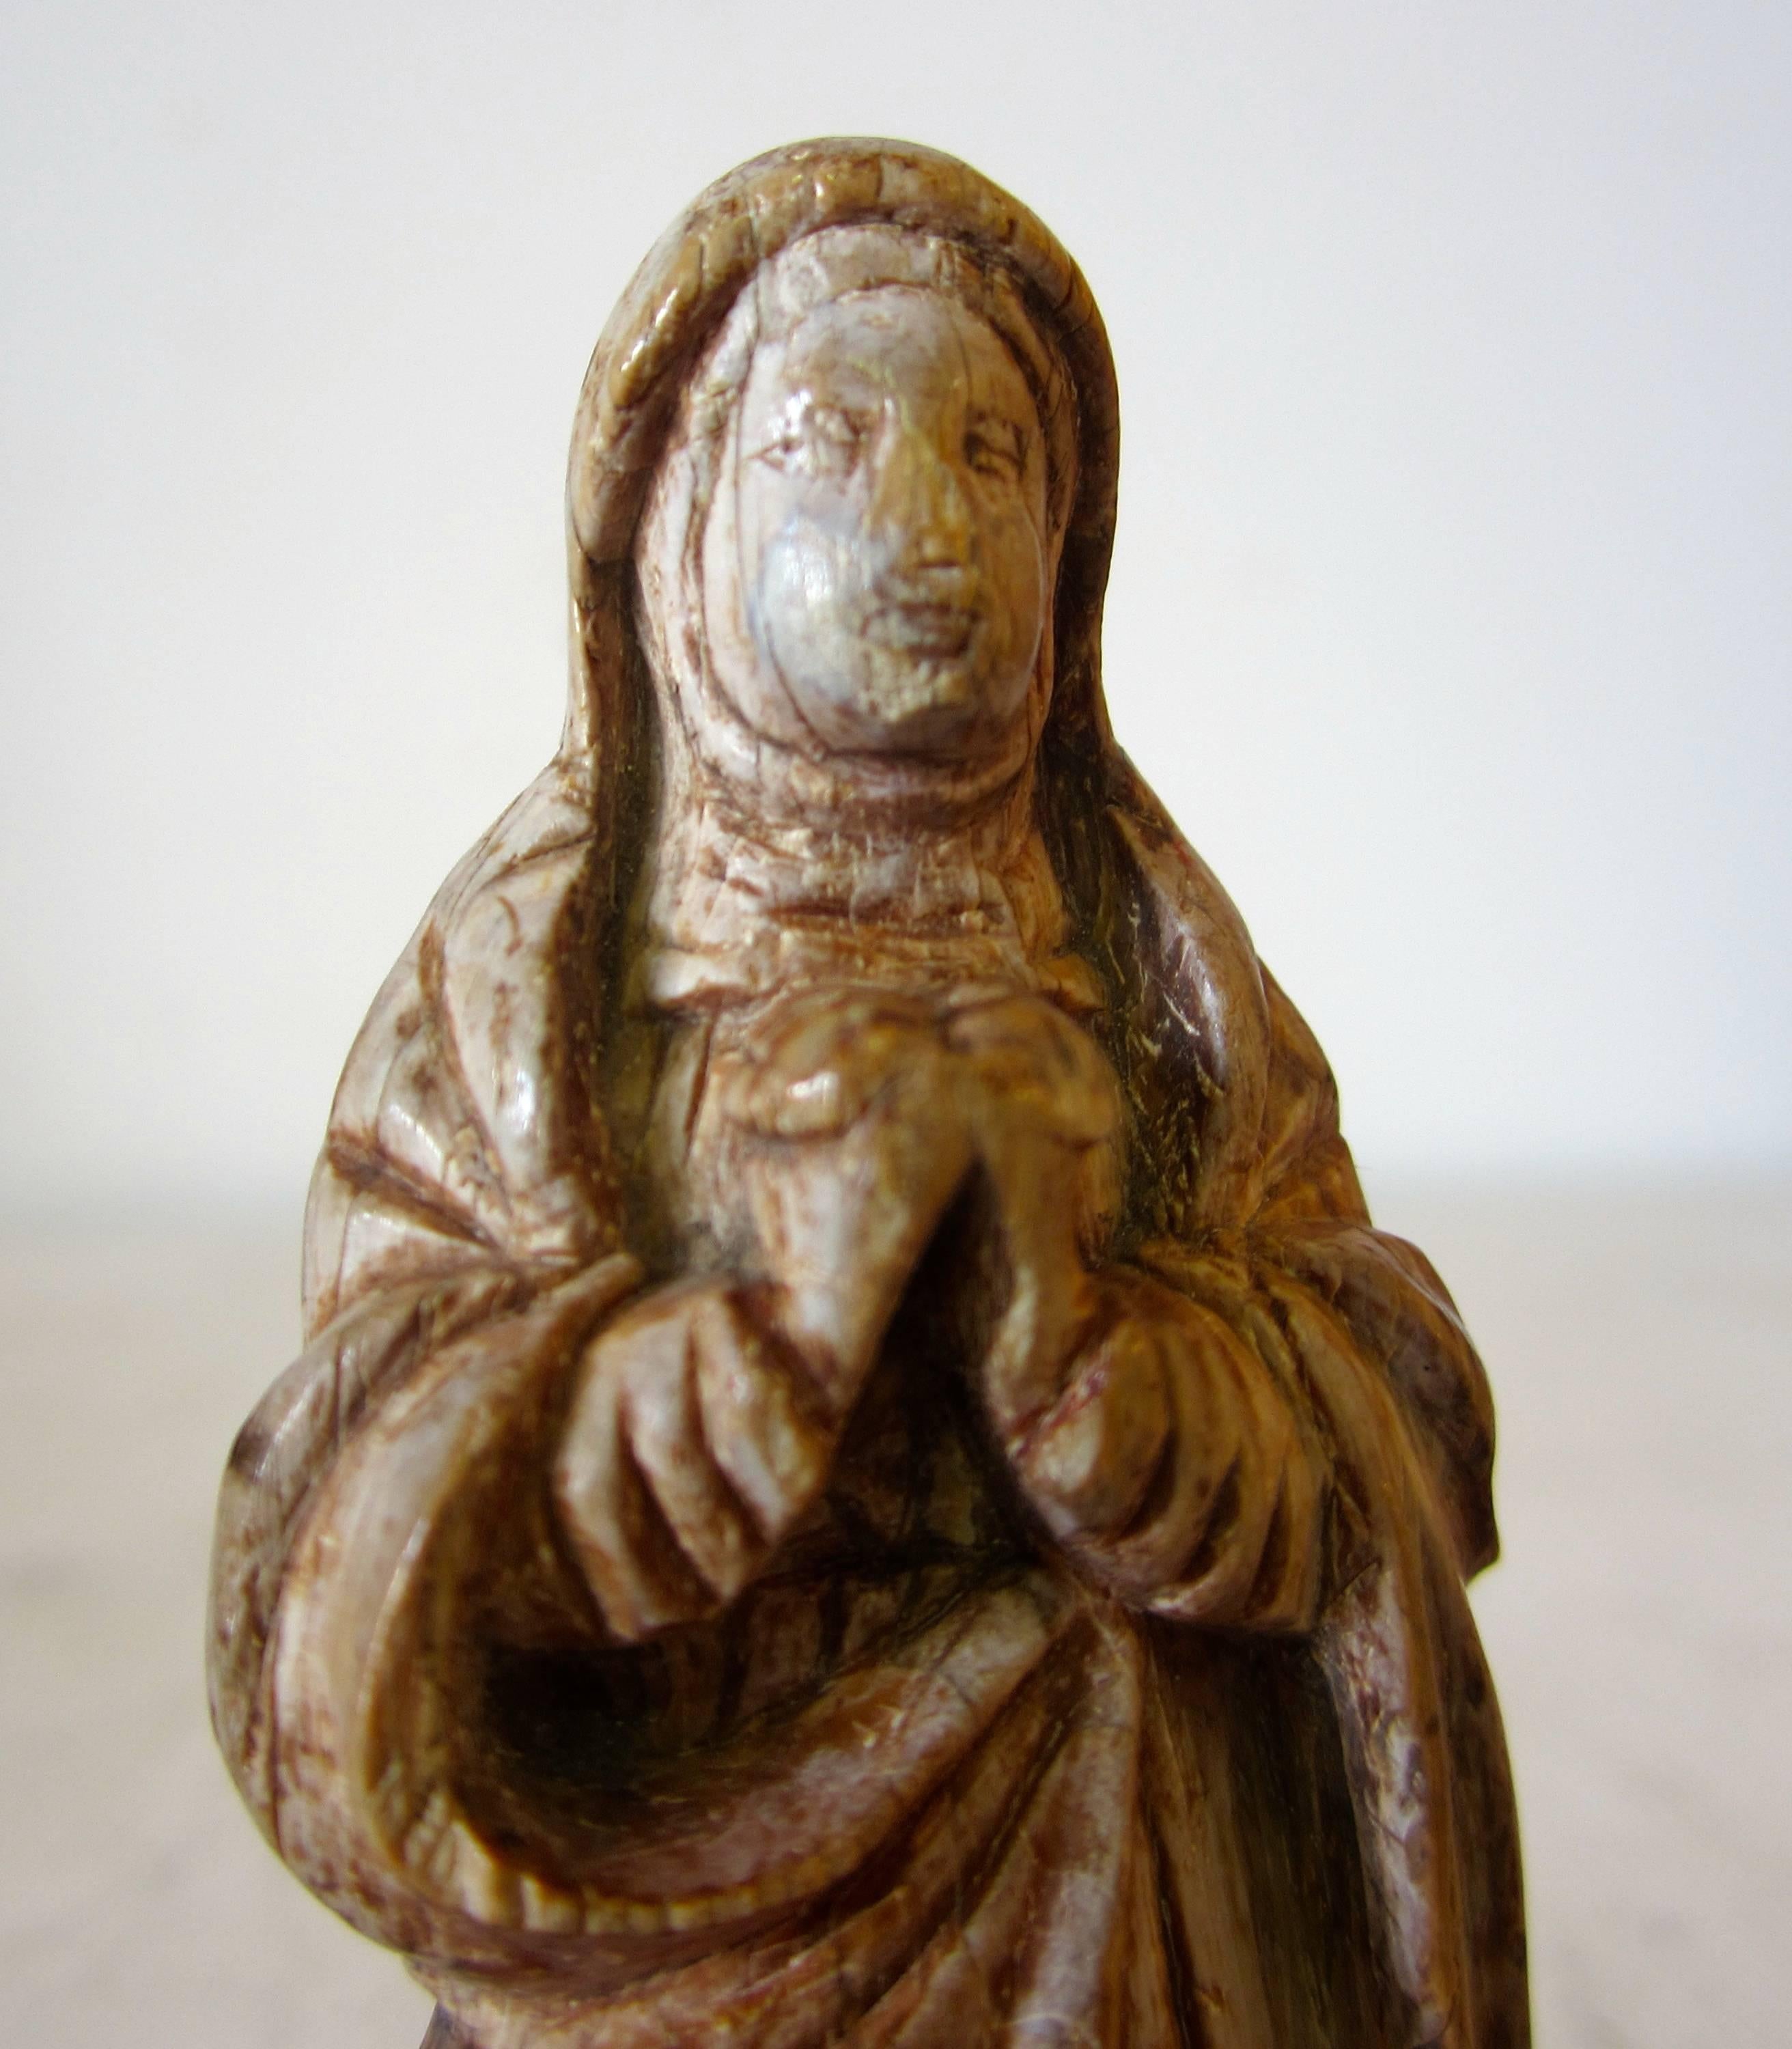 A small bone figure of Madonna. Quite smooth for the age, Goa, 17th century.